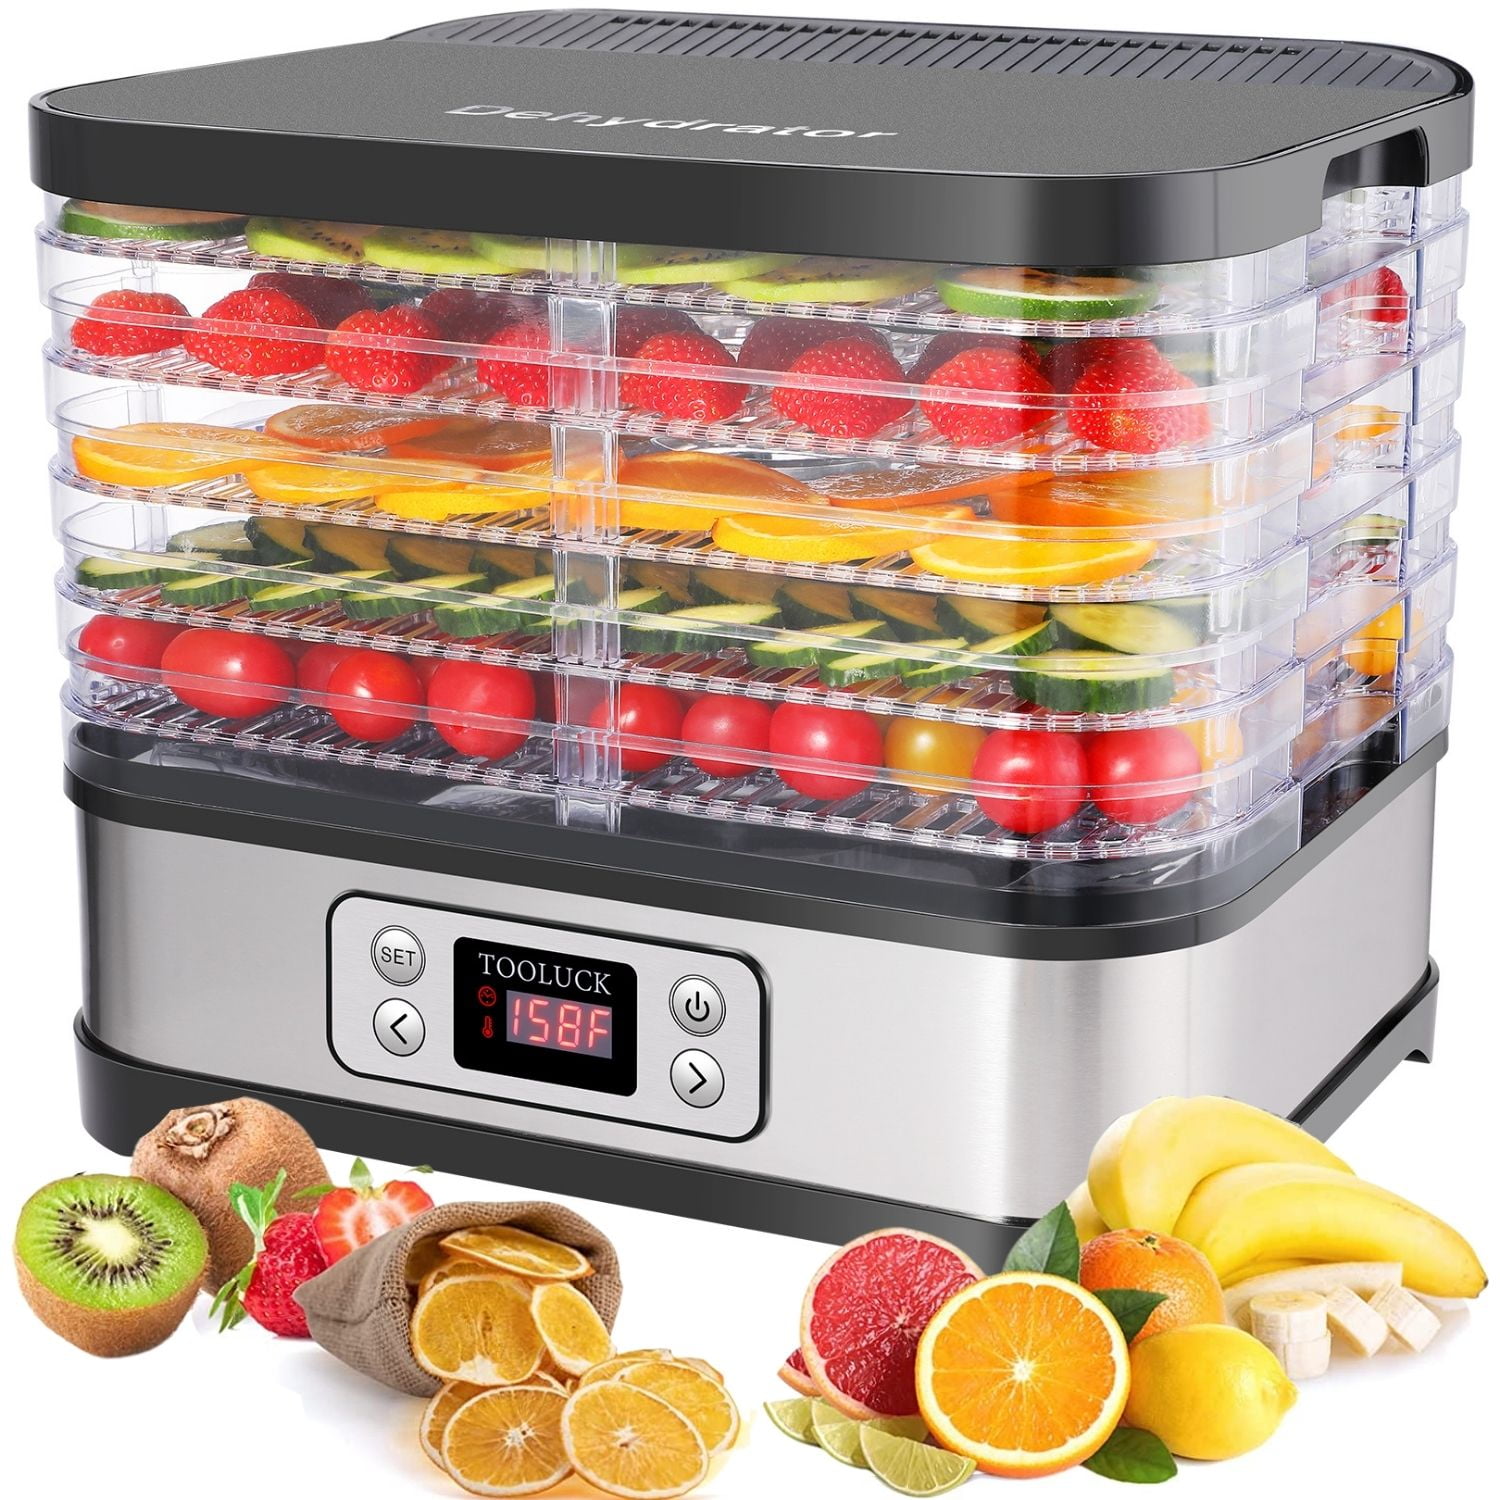 Fruit Tool Cabinet Drying Machine Dehydration Industrial Food Dehydrator  Stainless Steel Commercial Electric Food Dryer LLFA295t From Wdyyy, $313.99